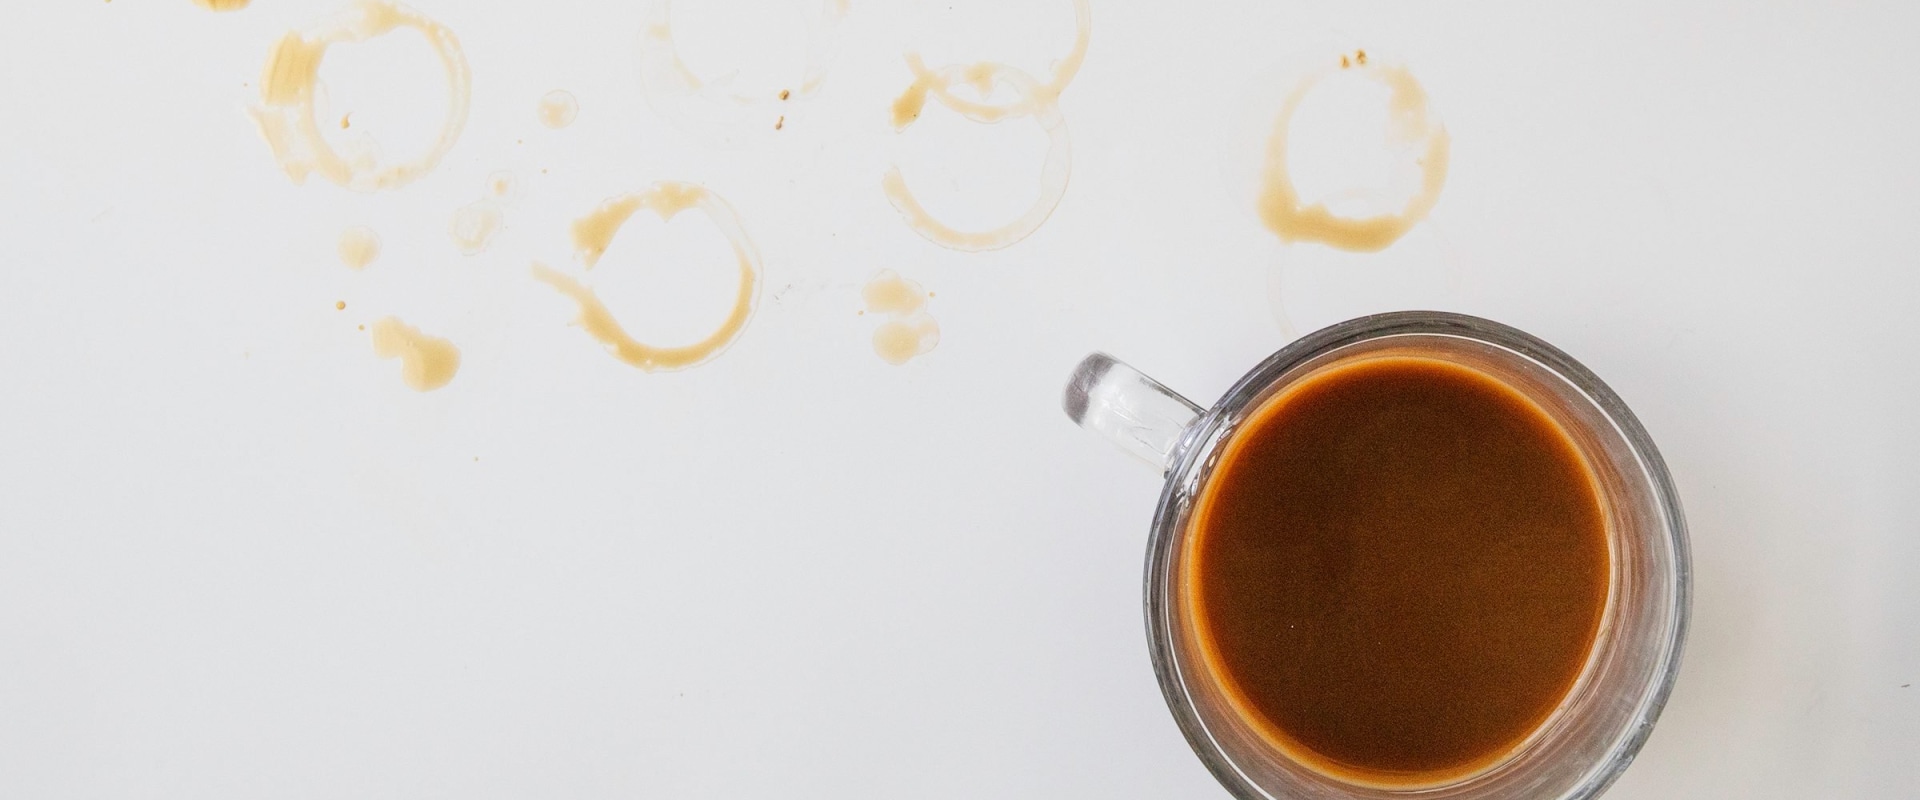 How to Remove Coffee Stains Quickly and Easily